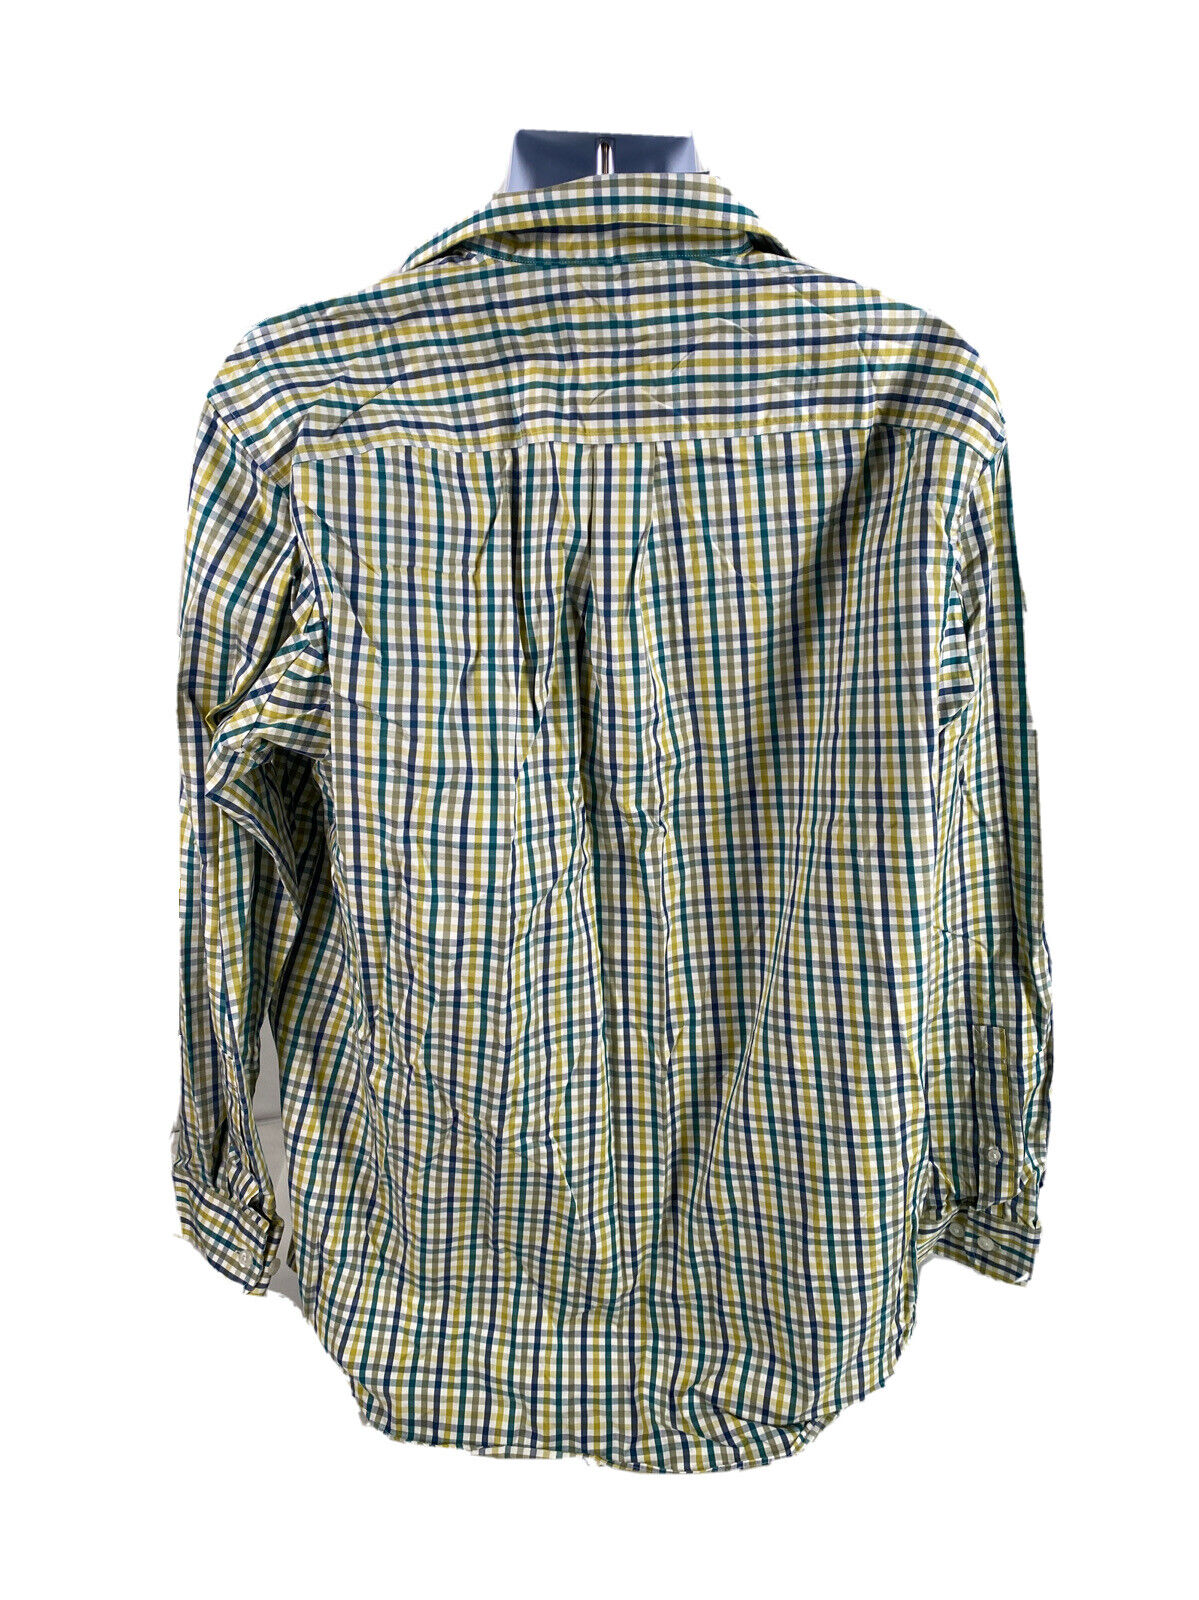 Duluth Trading Men's Green/Blue Wrinkle Fighter Button Up Shirt - L Tall